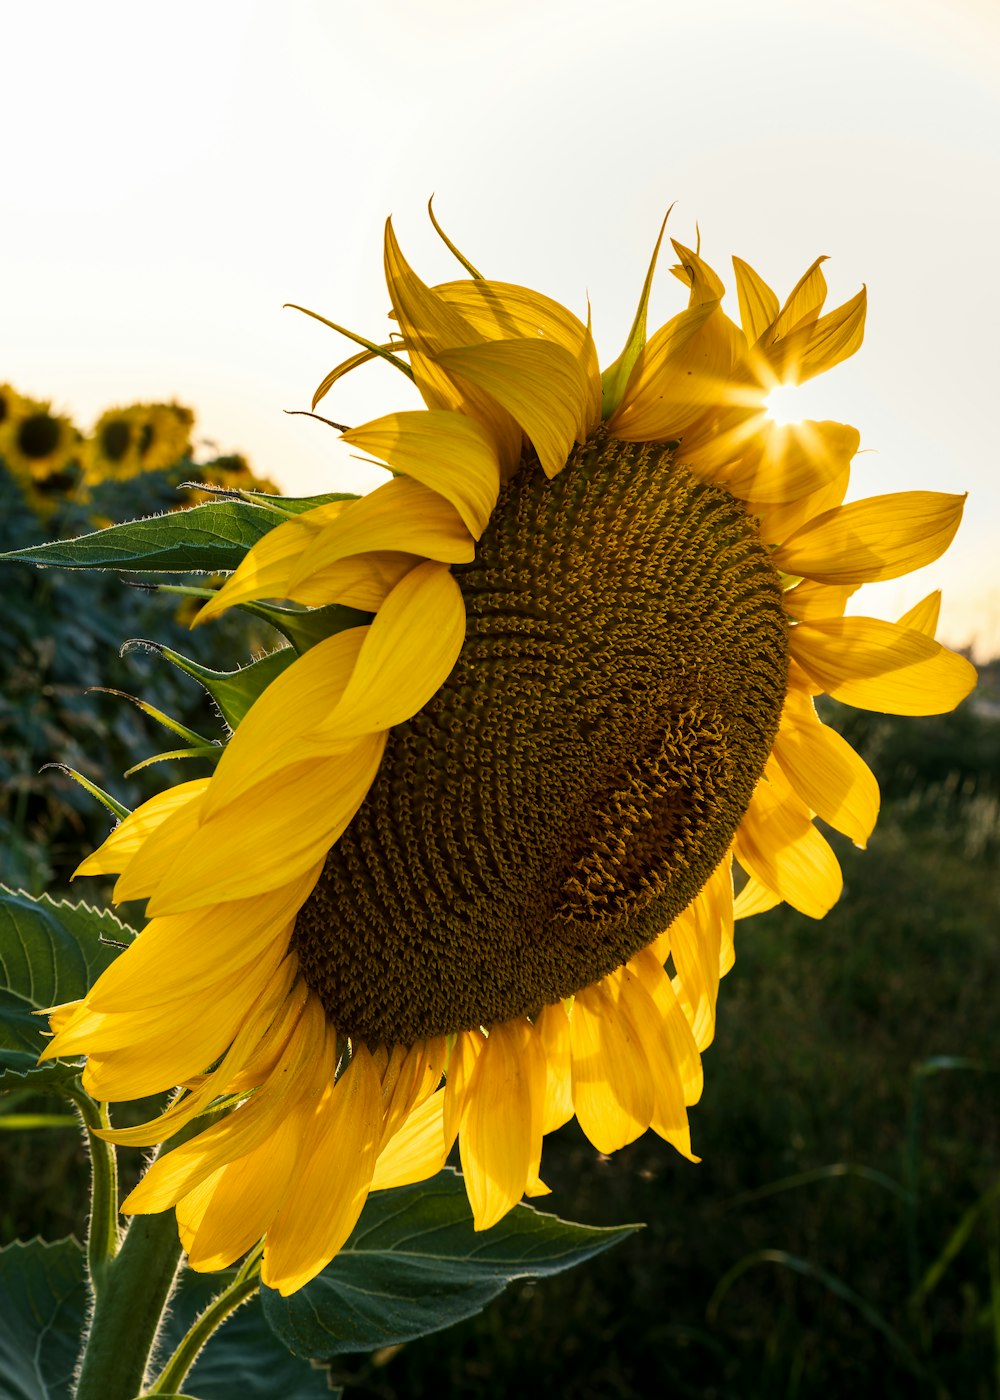 a large sunflower with a large center